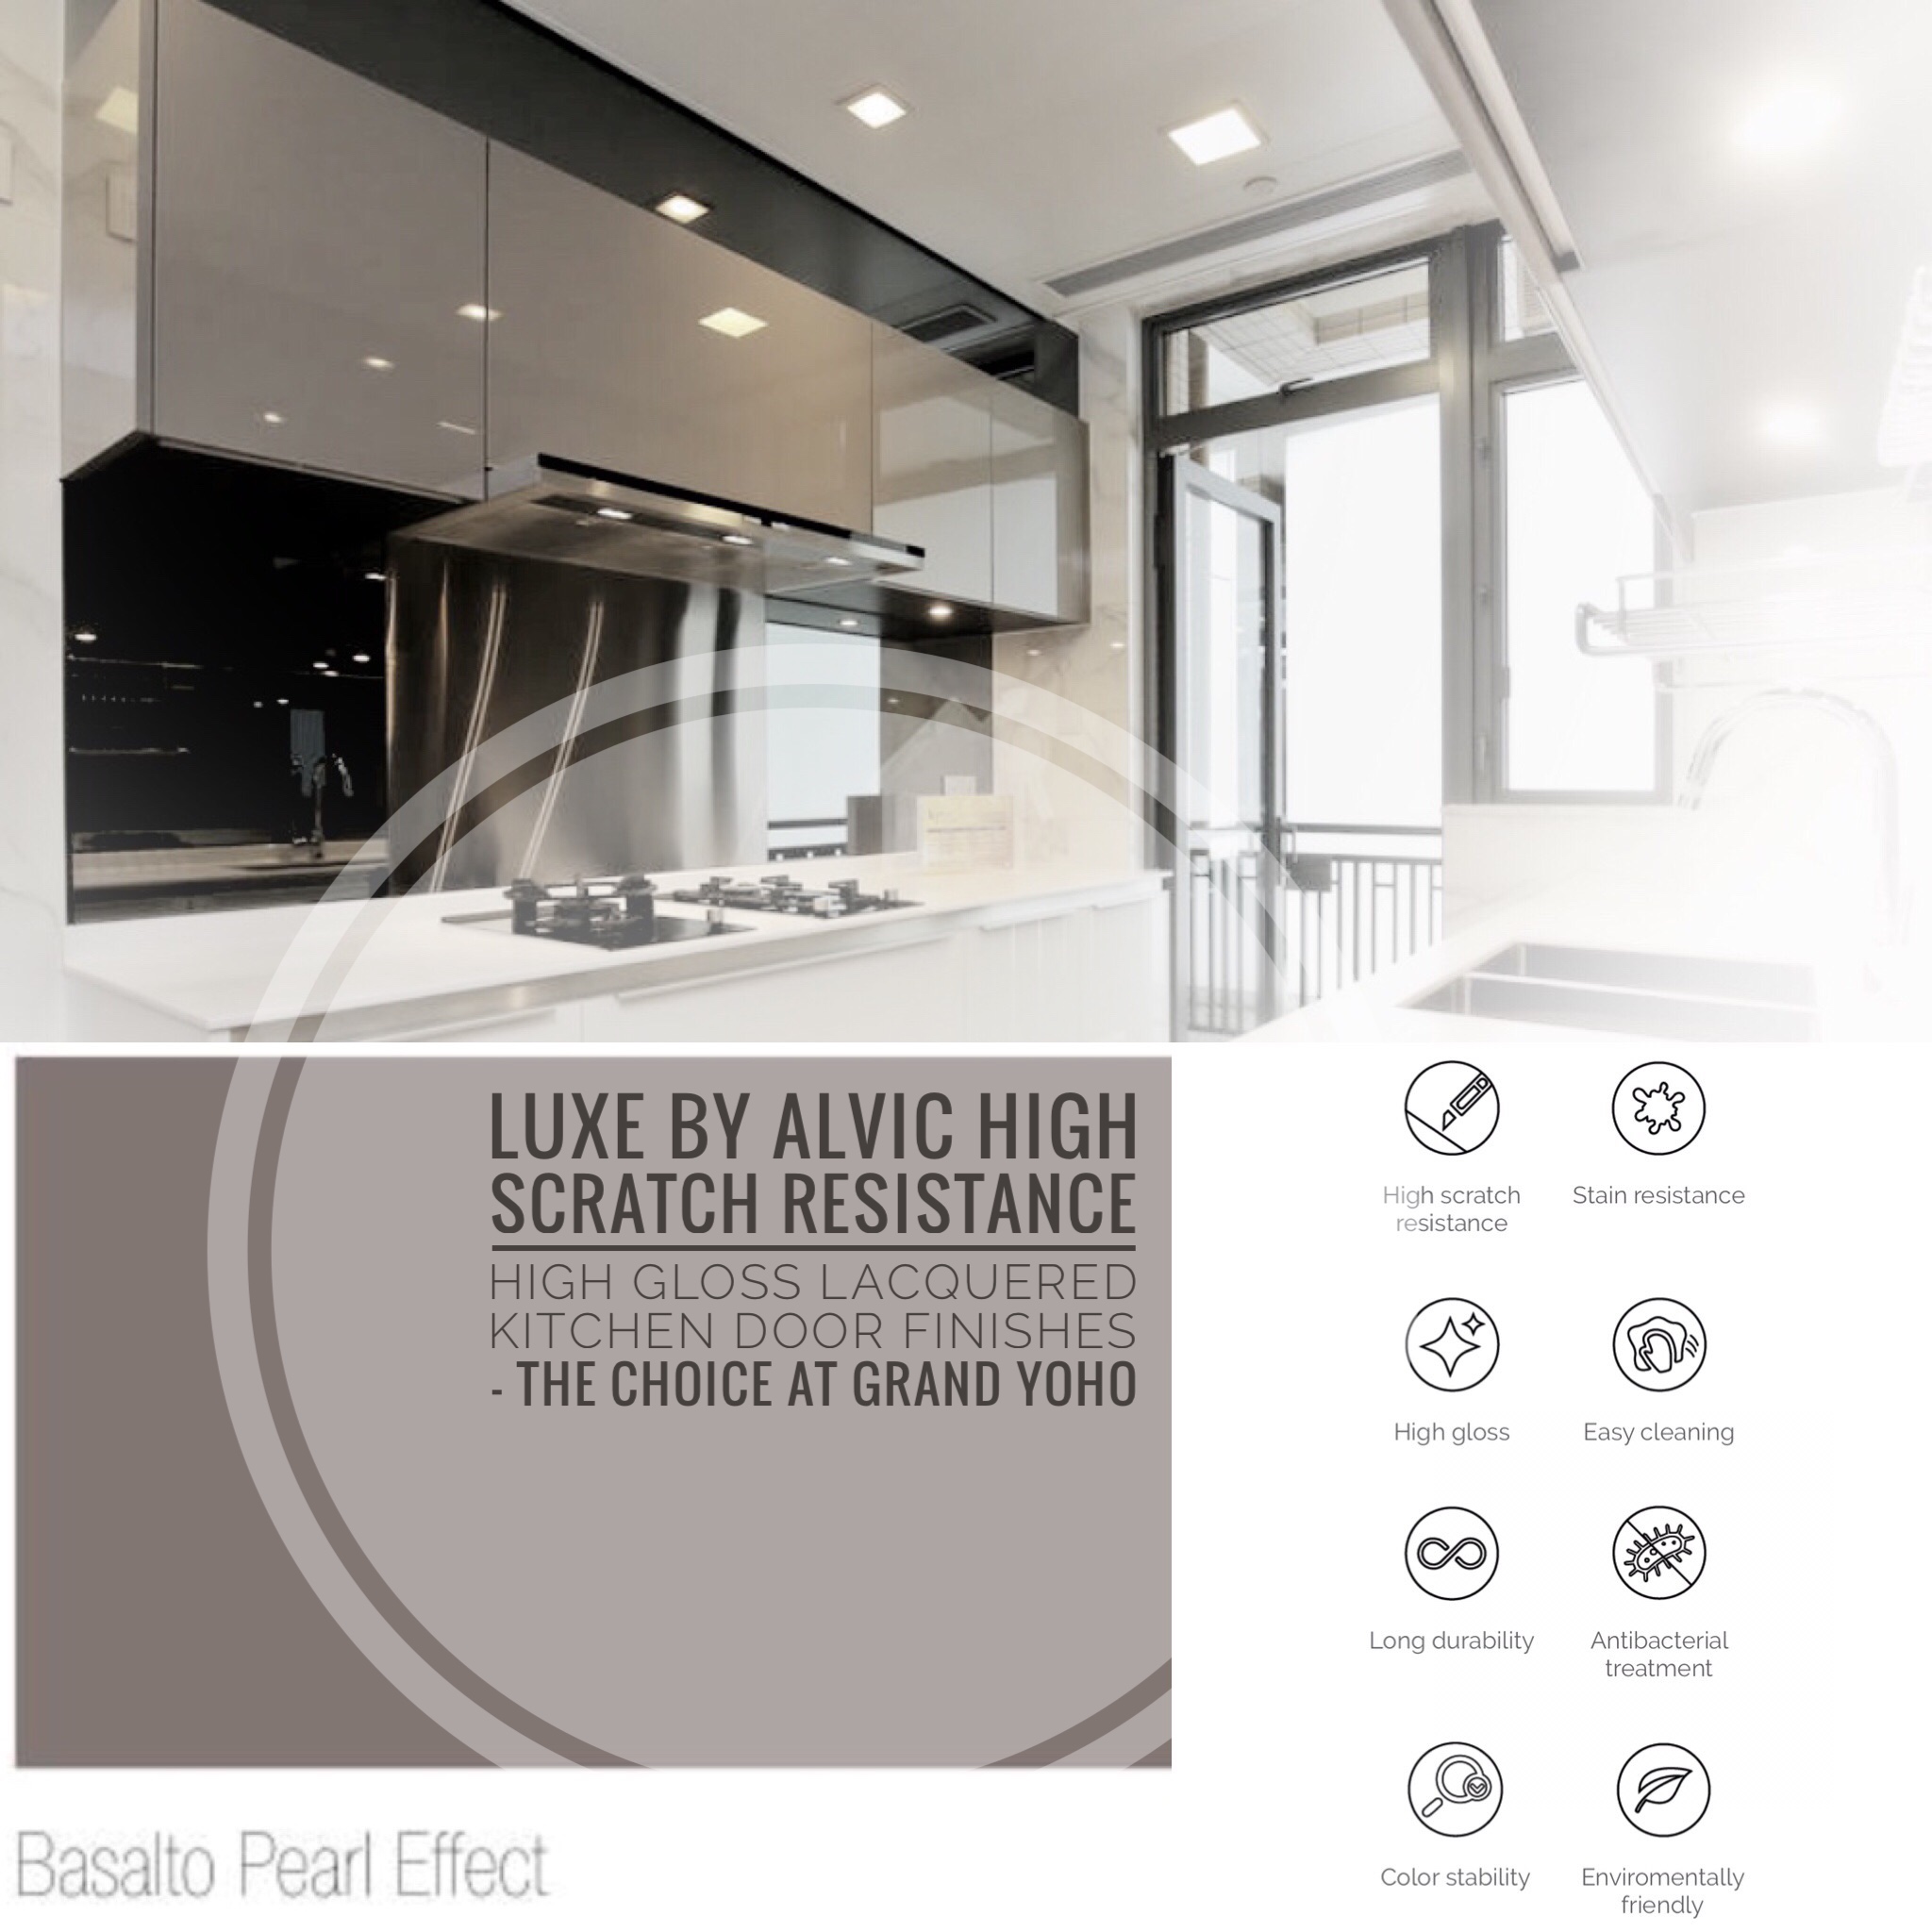 LUXE by ALVIC at GRAND YOHO – High Scratch Resistance High Gloss Lacquered Kitchen Doors